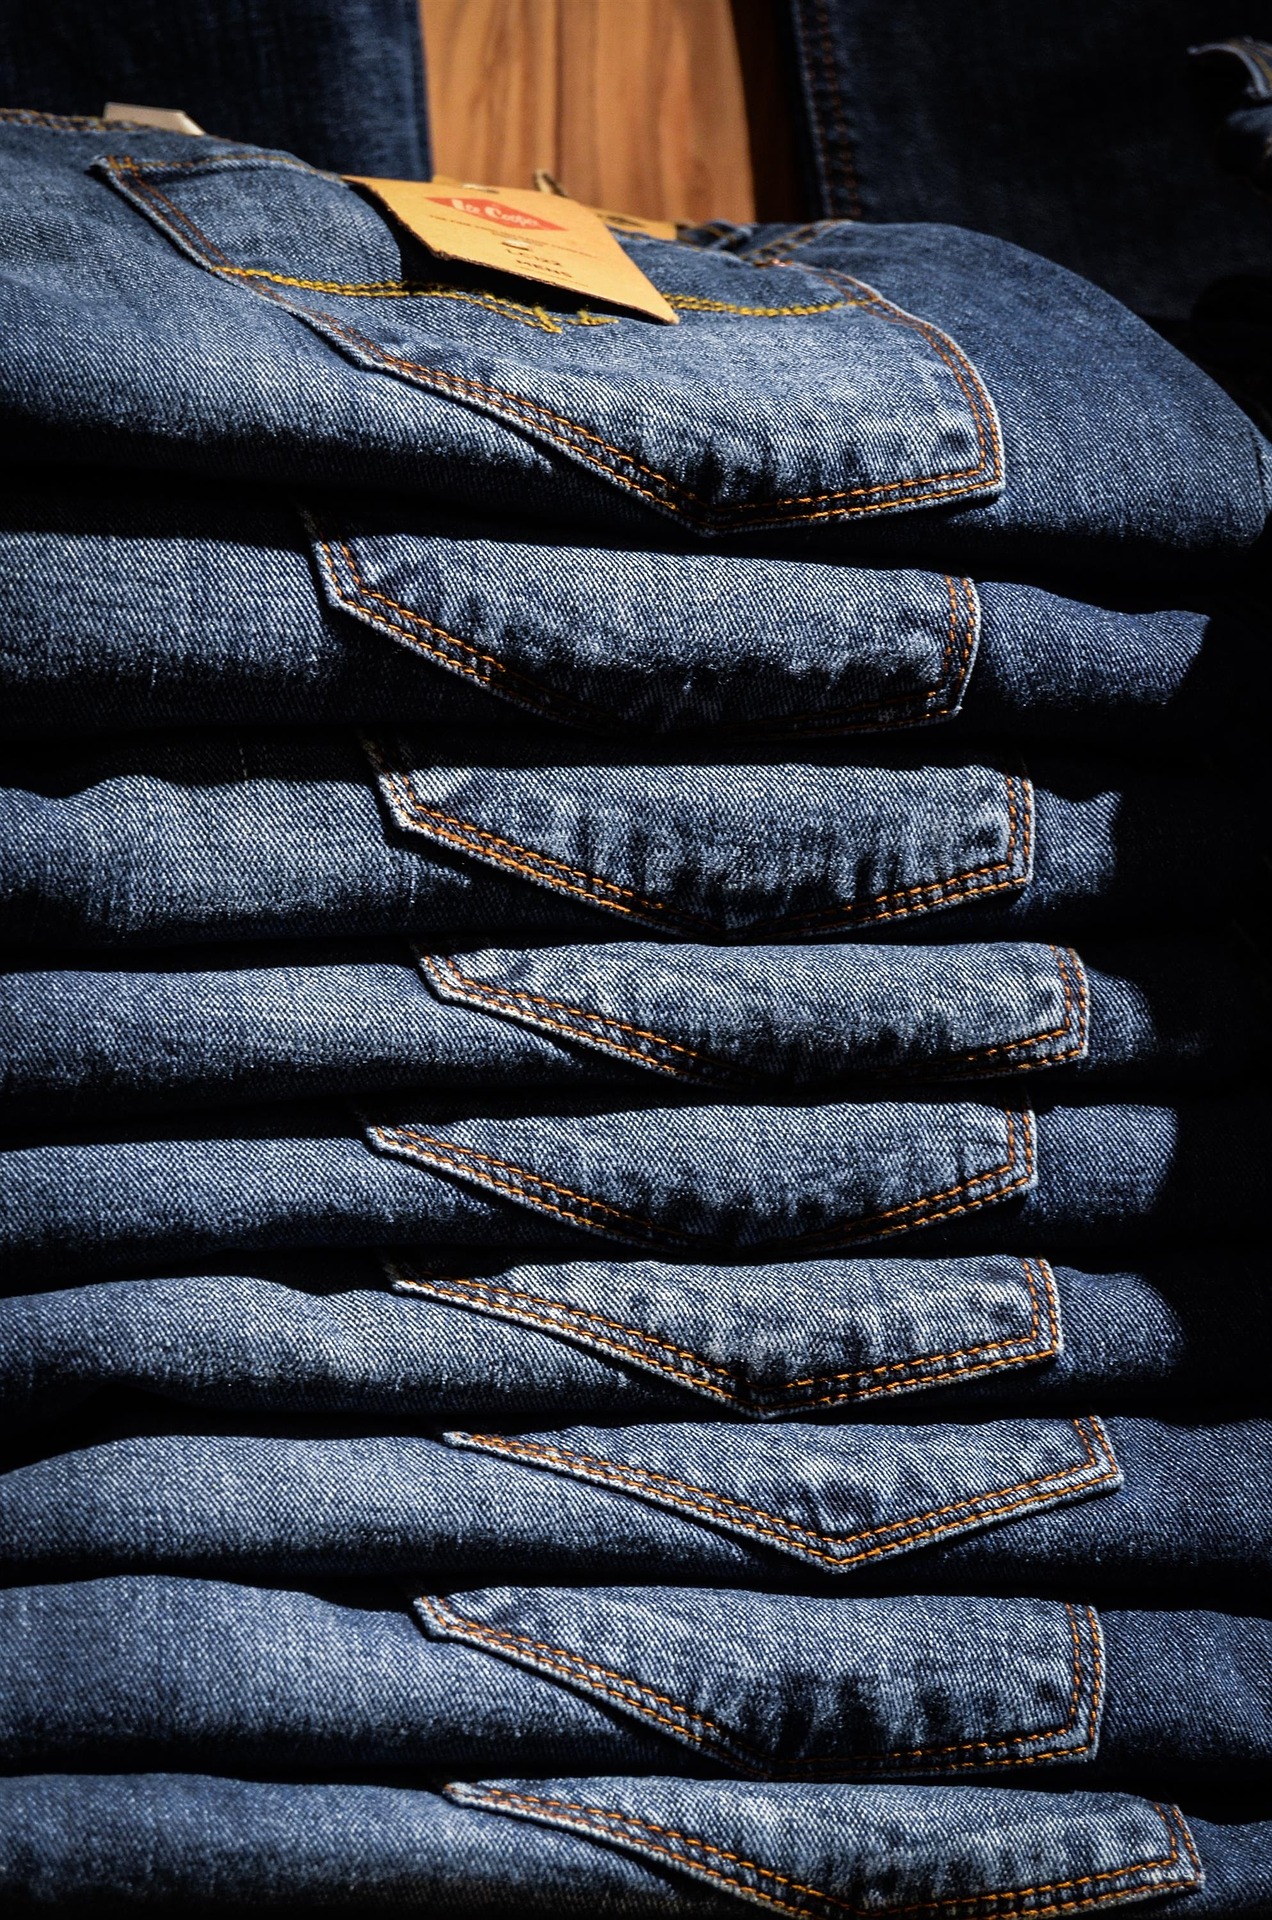 jeans-g7d1fca15f_1920